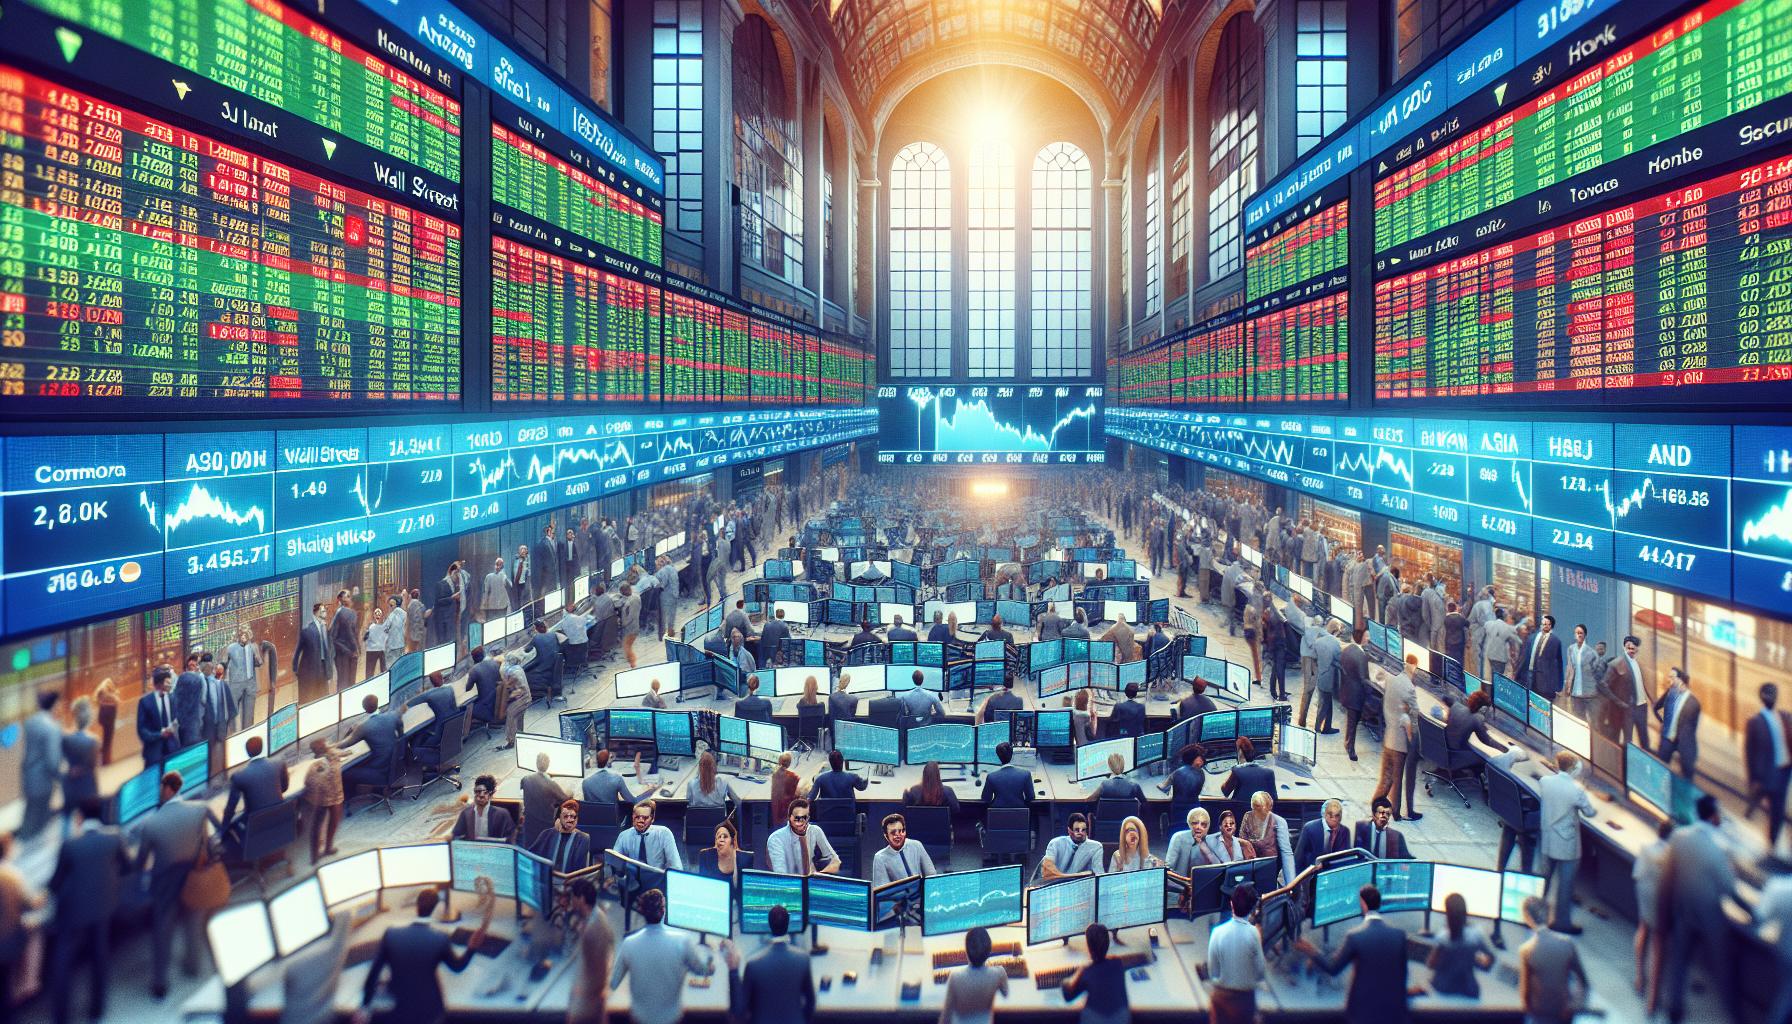 European Stocks Rise as Markets Open, Indicative of Positive Start | FinOracle